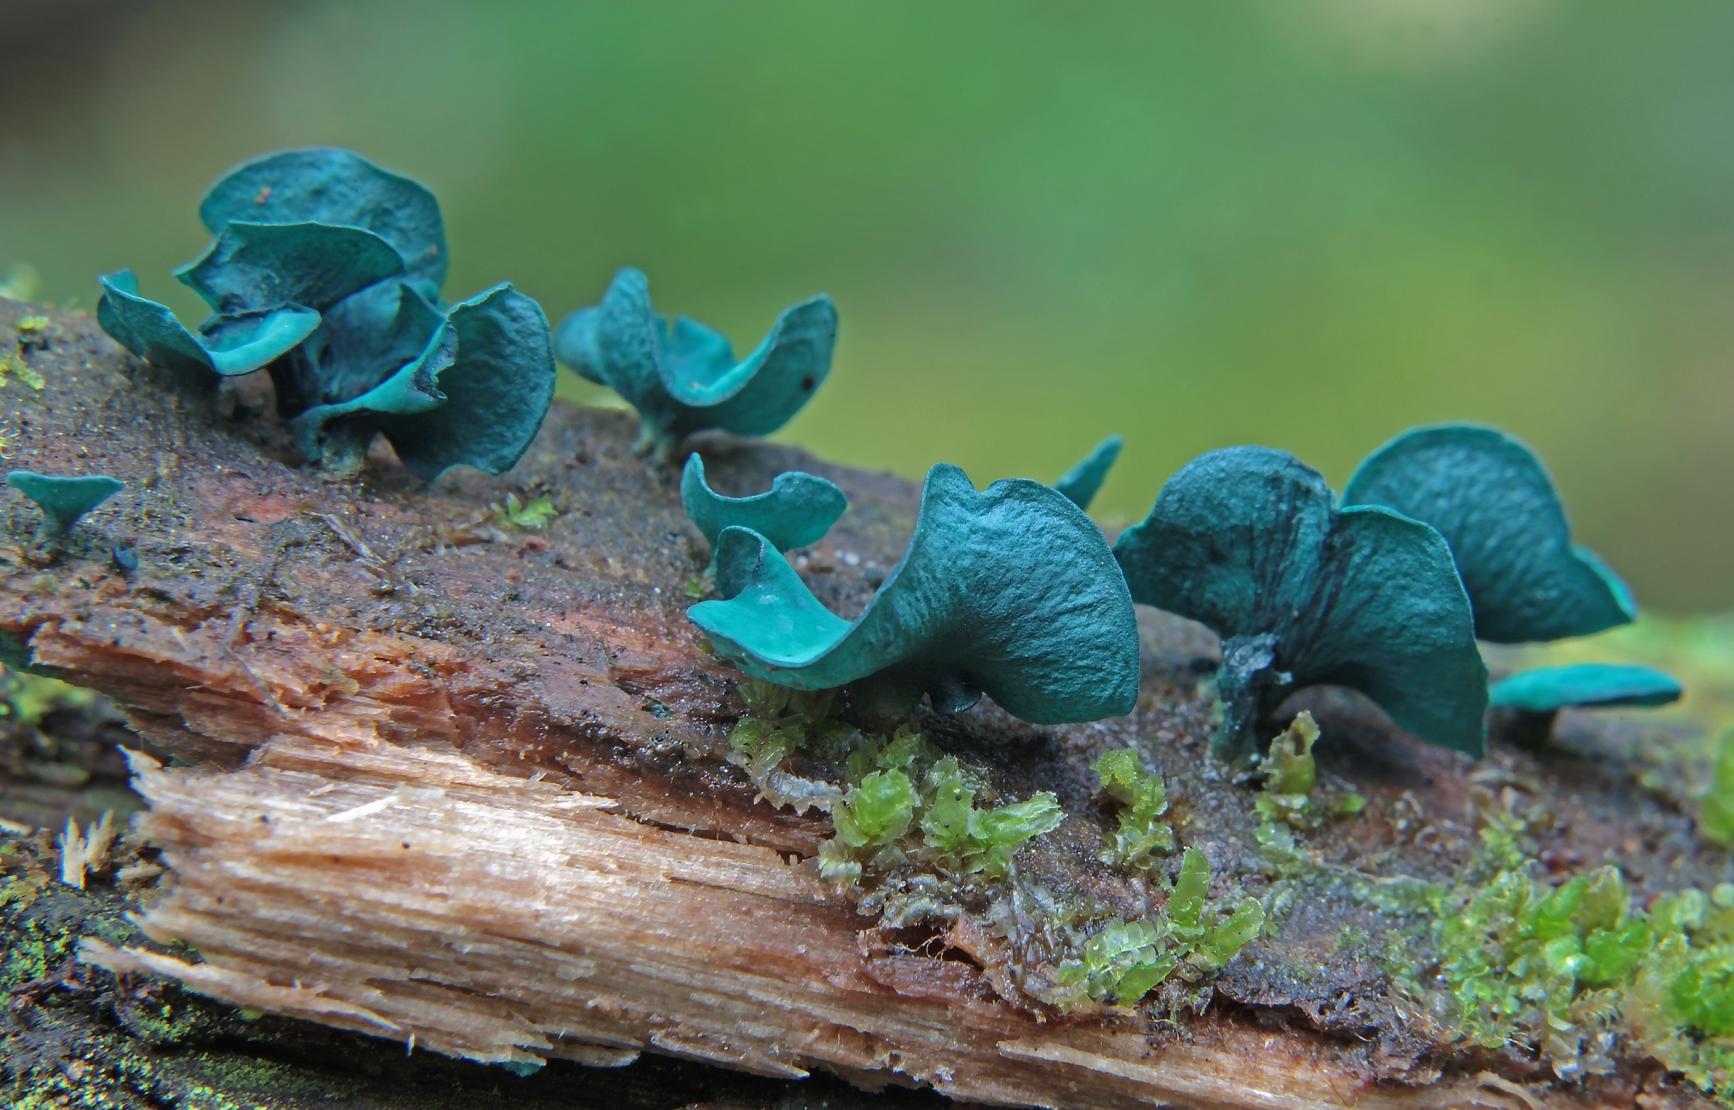 Blue fungus on a piece of wood